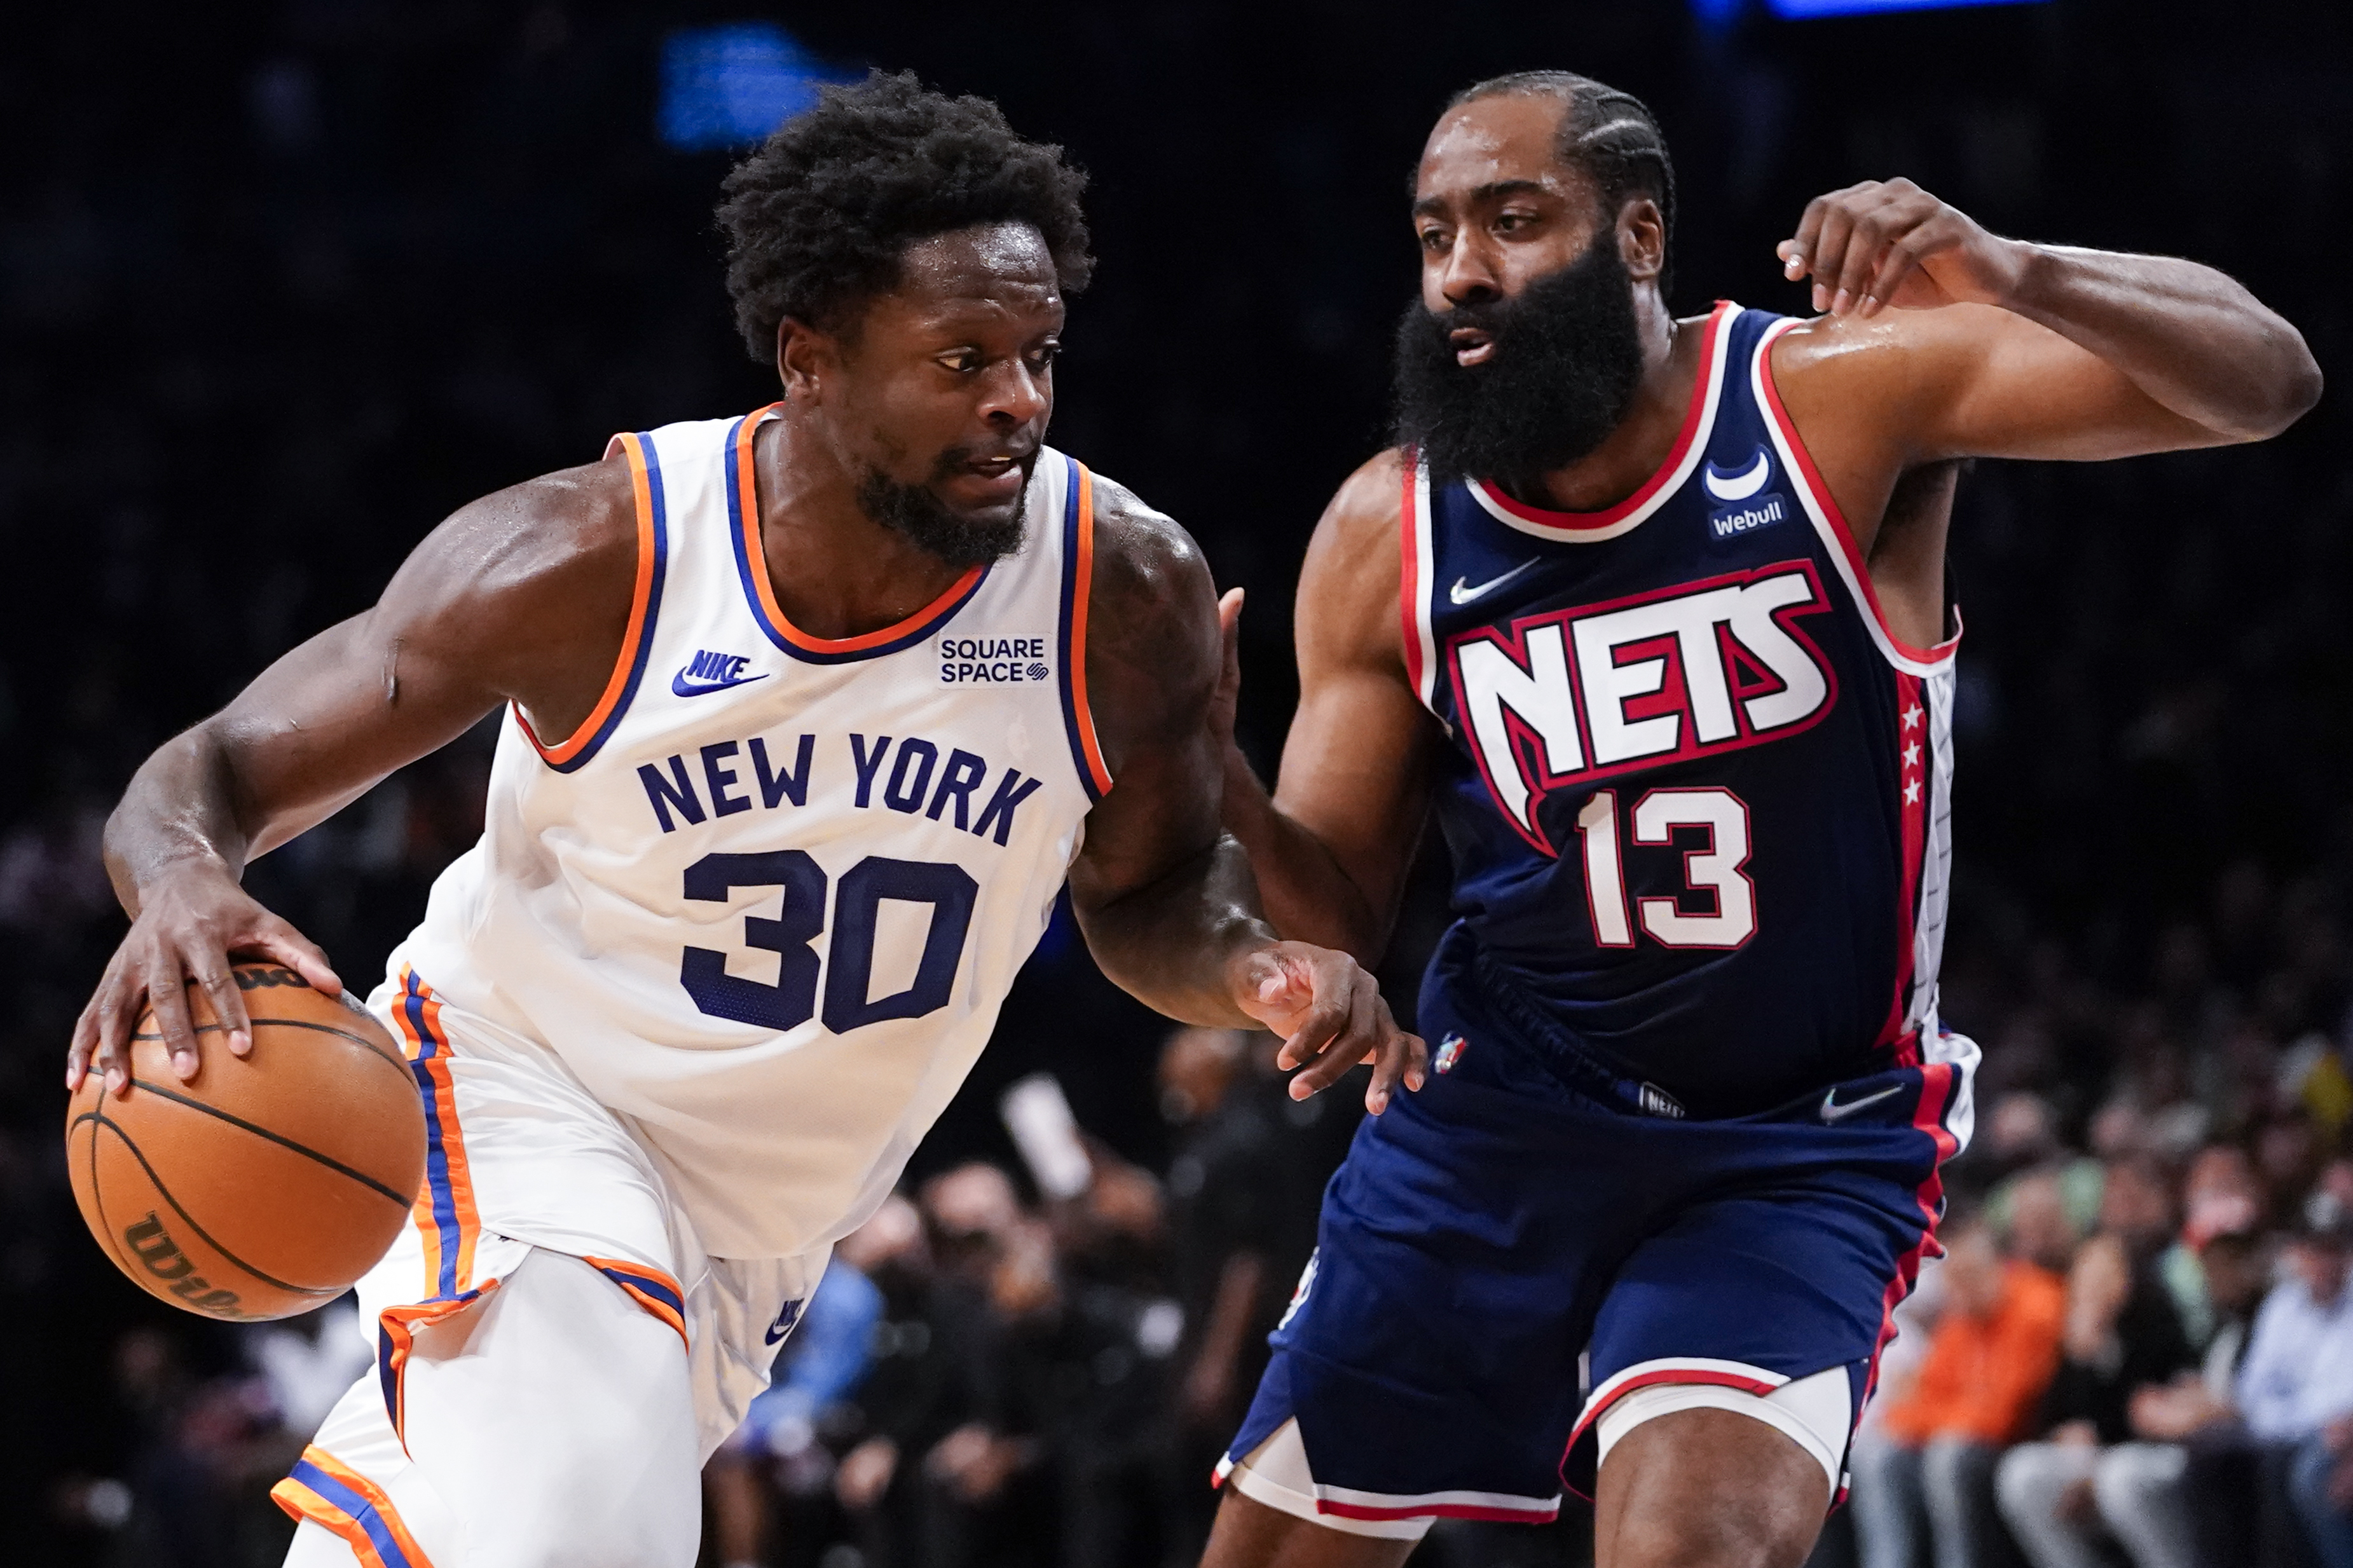 Knicks forward Julius Randle drives against Brooklyn Nets guard James Harden (13) during the first half of a game, Tuesday, Nov. 30, 2021.